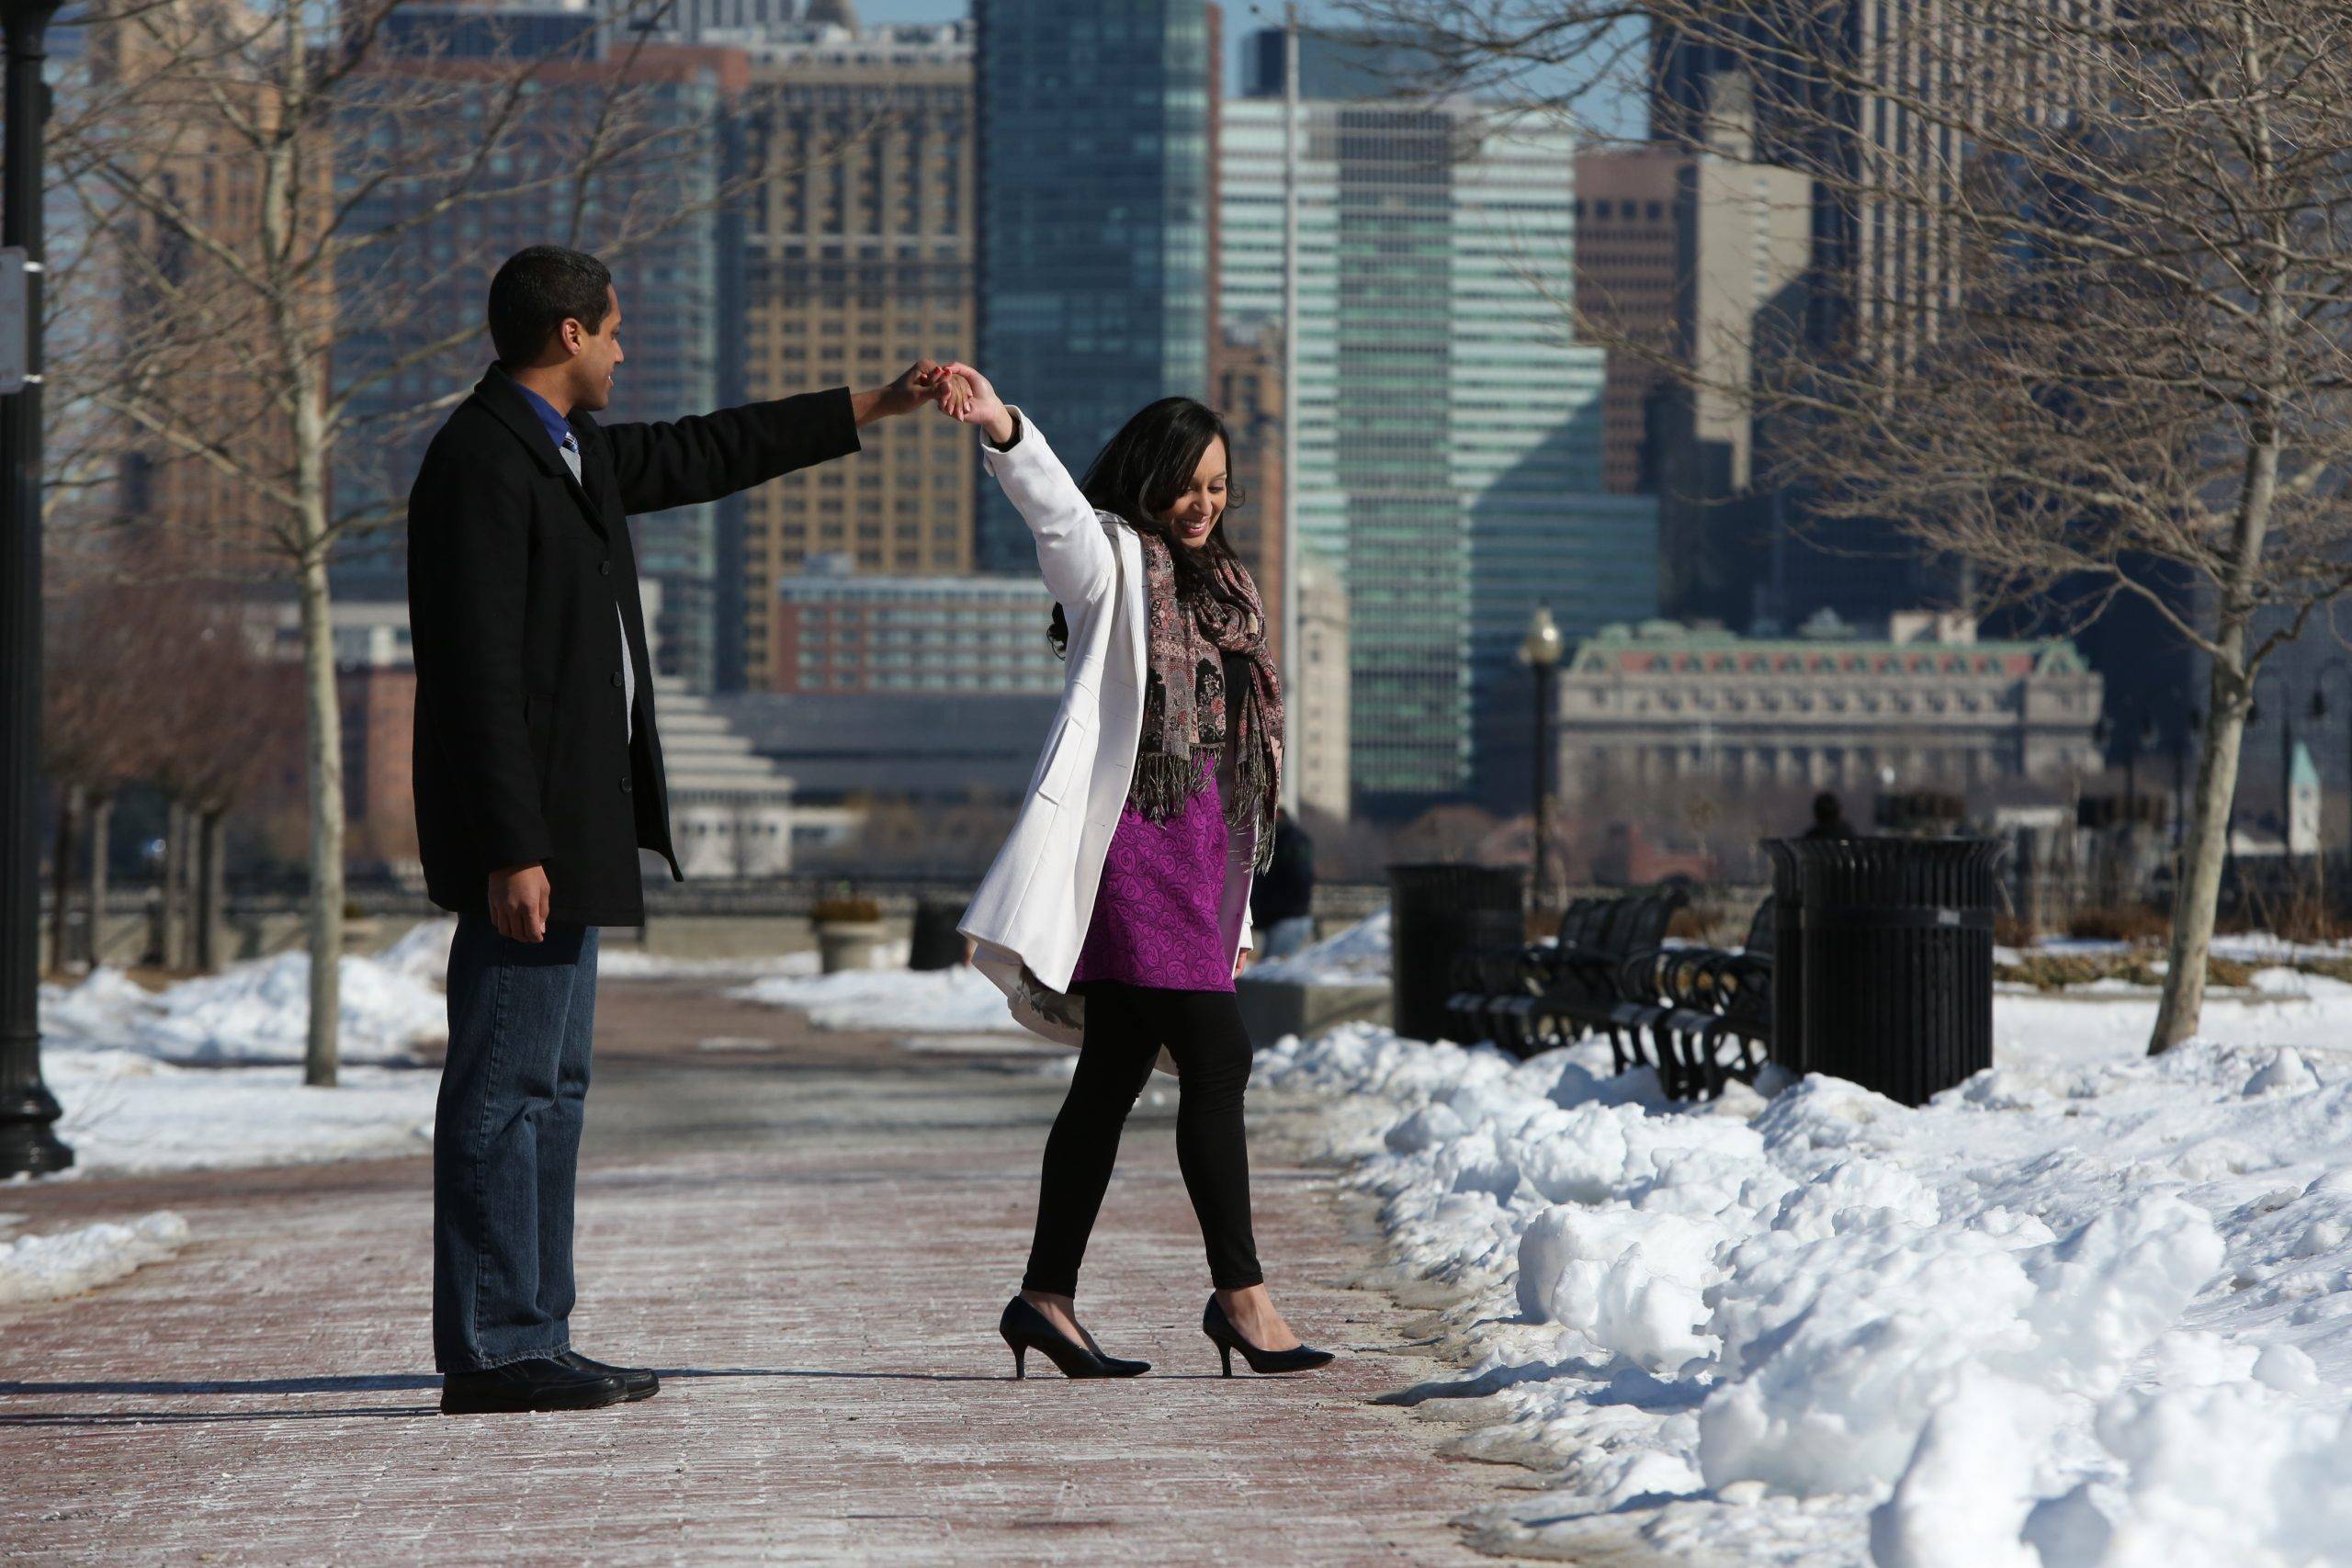 A man and woman walking in the snow with a city in the background.